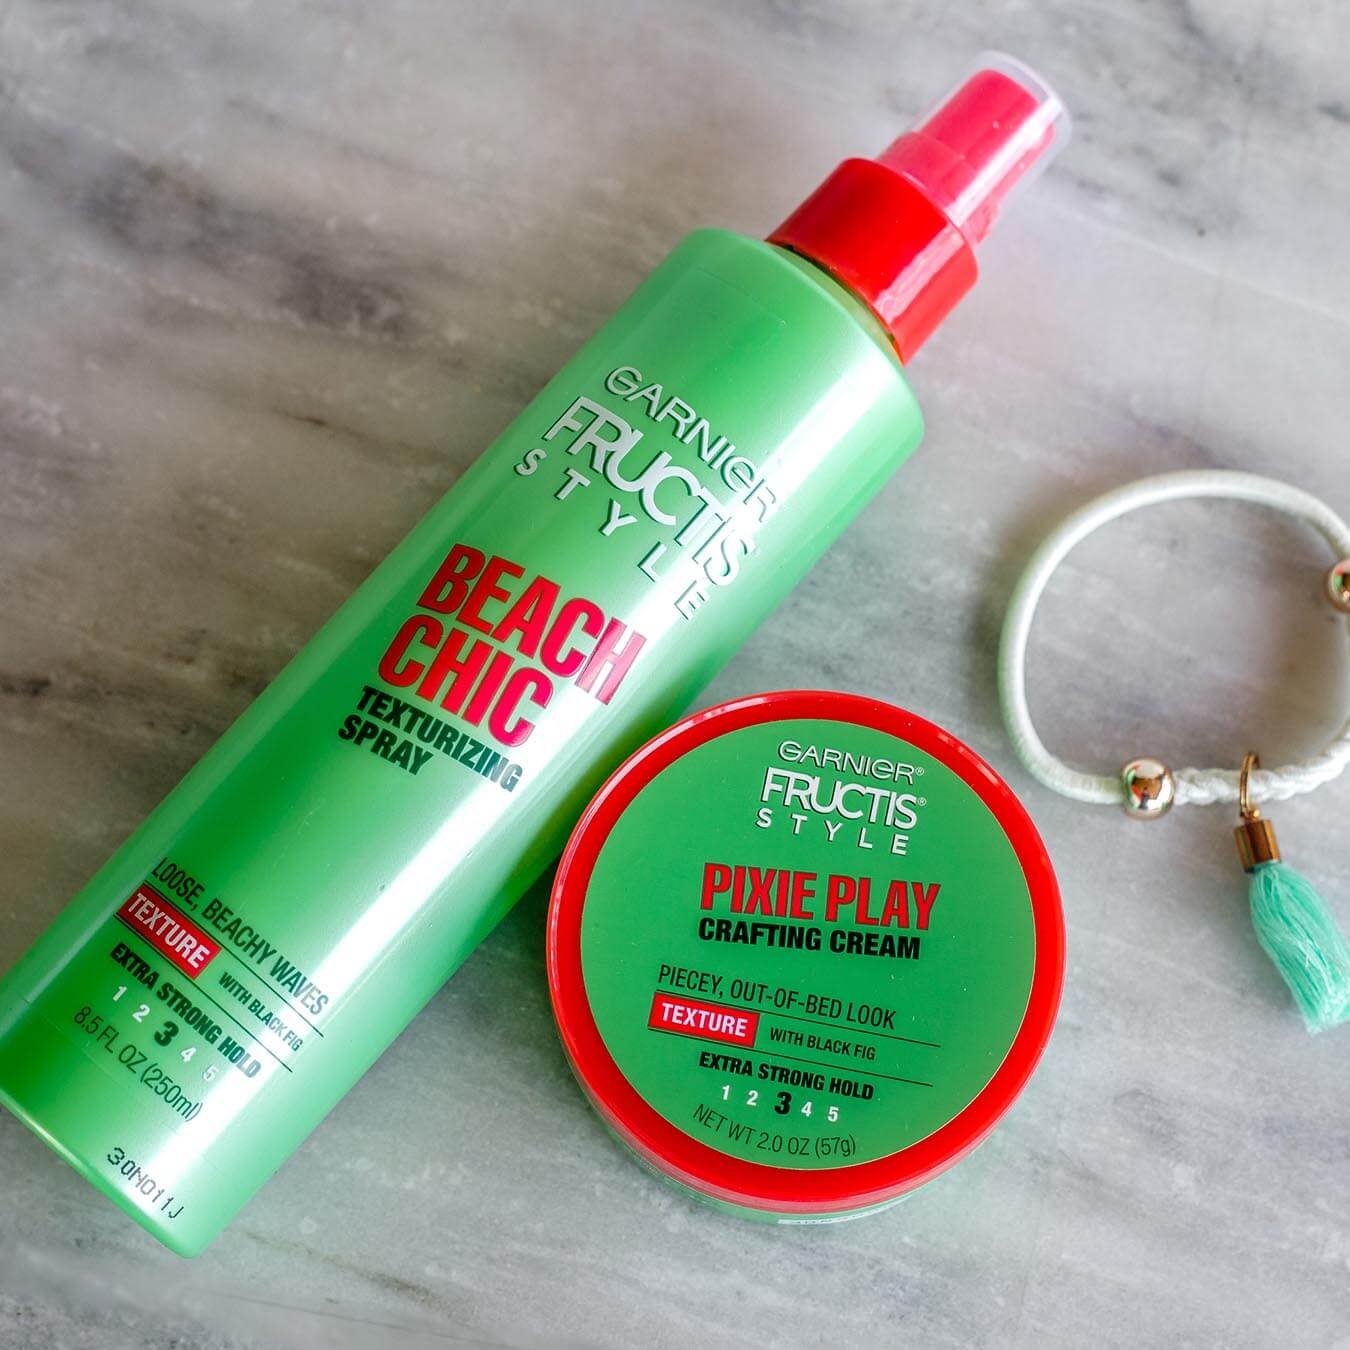 Garnier Fructis Style Beach Chic Texturizing Spray and Fructis Style Pixie Play Crafting Cream on gray marble next to a white bracelet with gold beads and a green tassel.